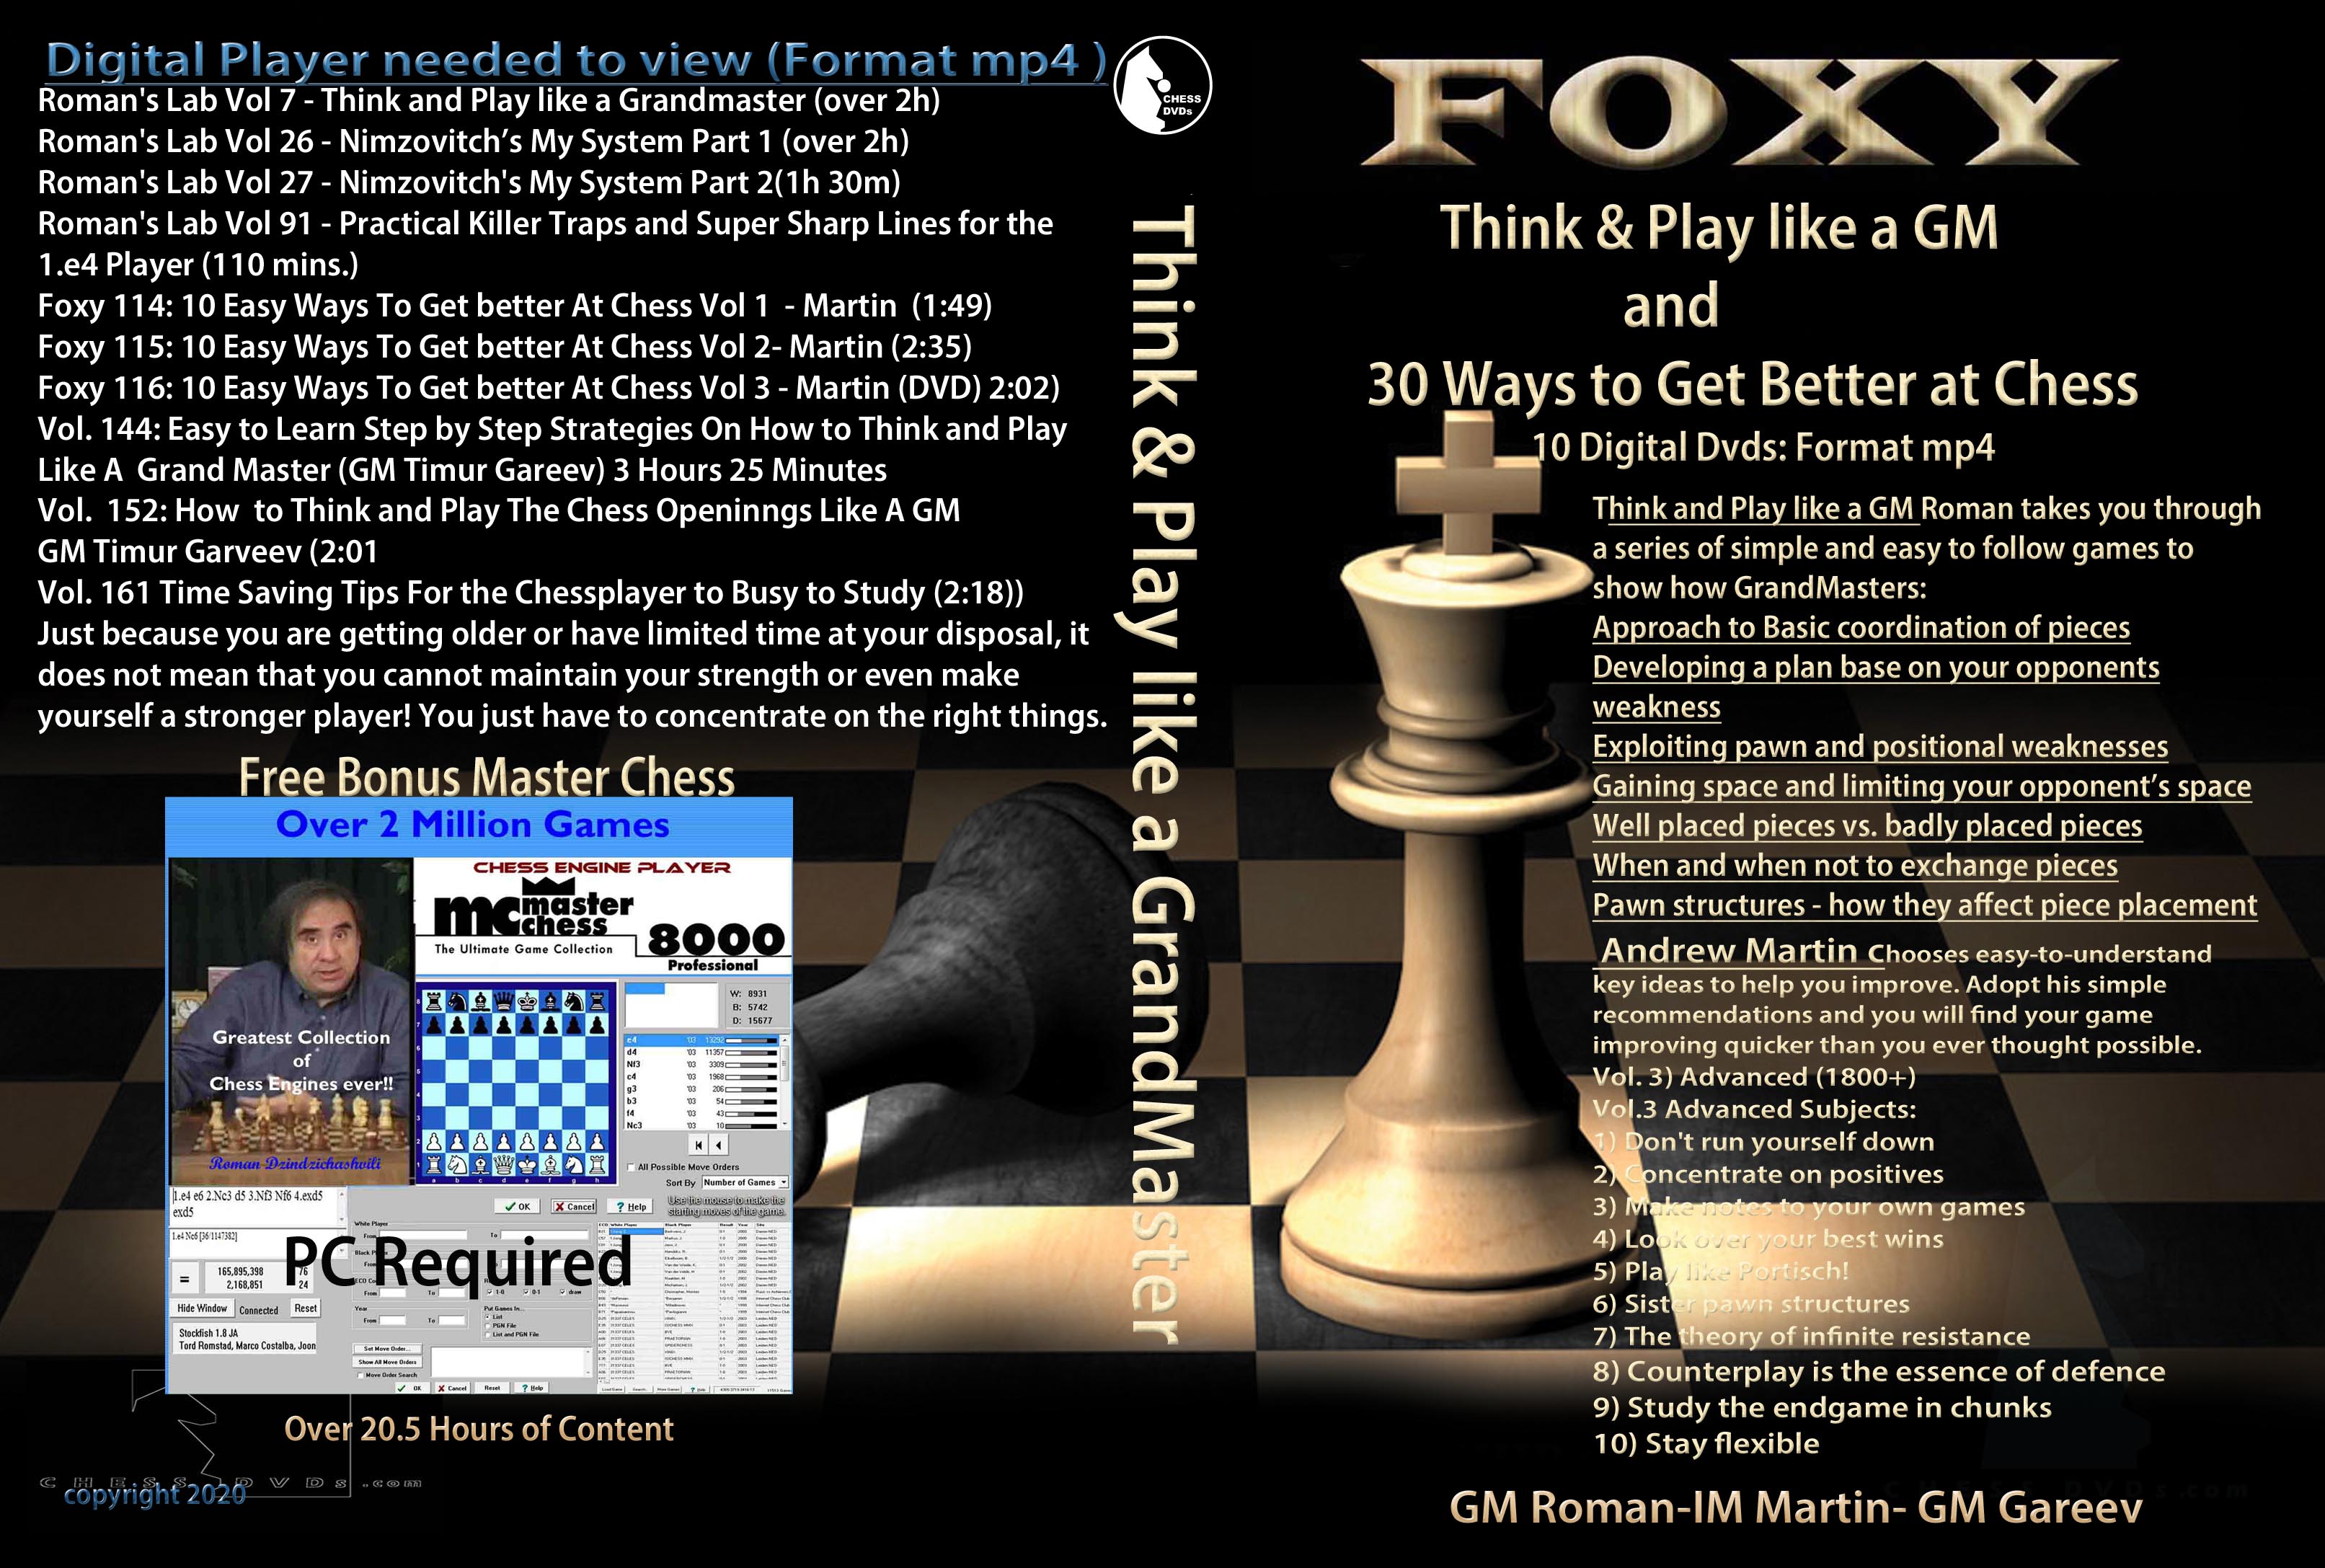 Think & Play like a GM and 30 Ways to Get Better at Chess